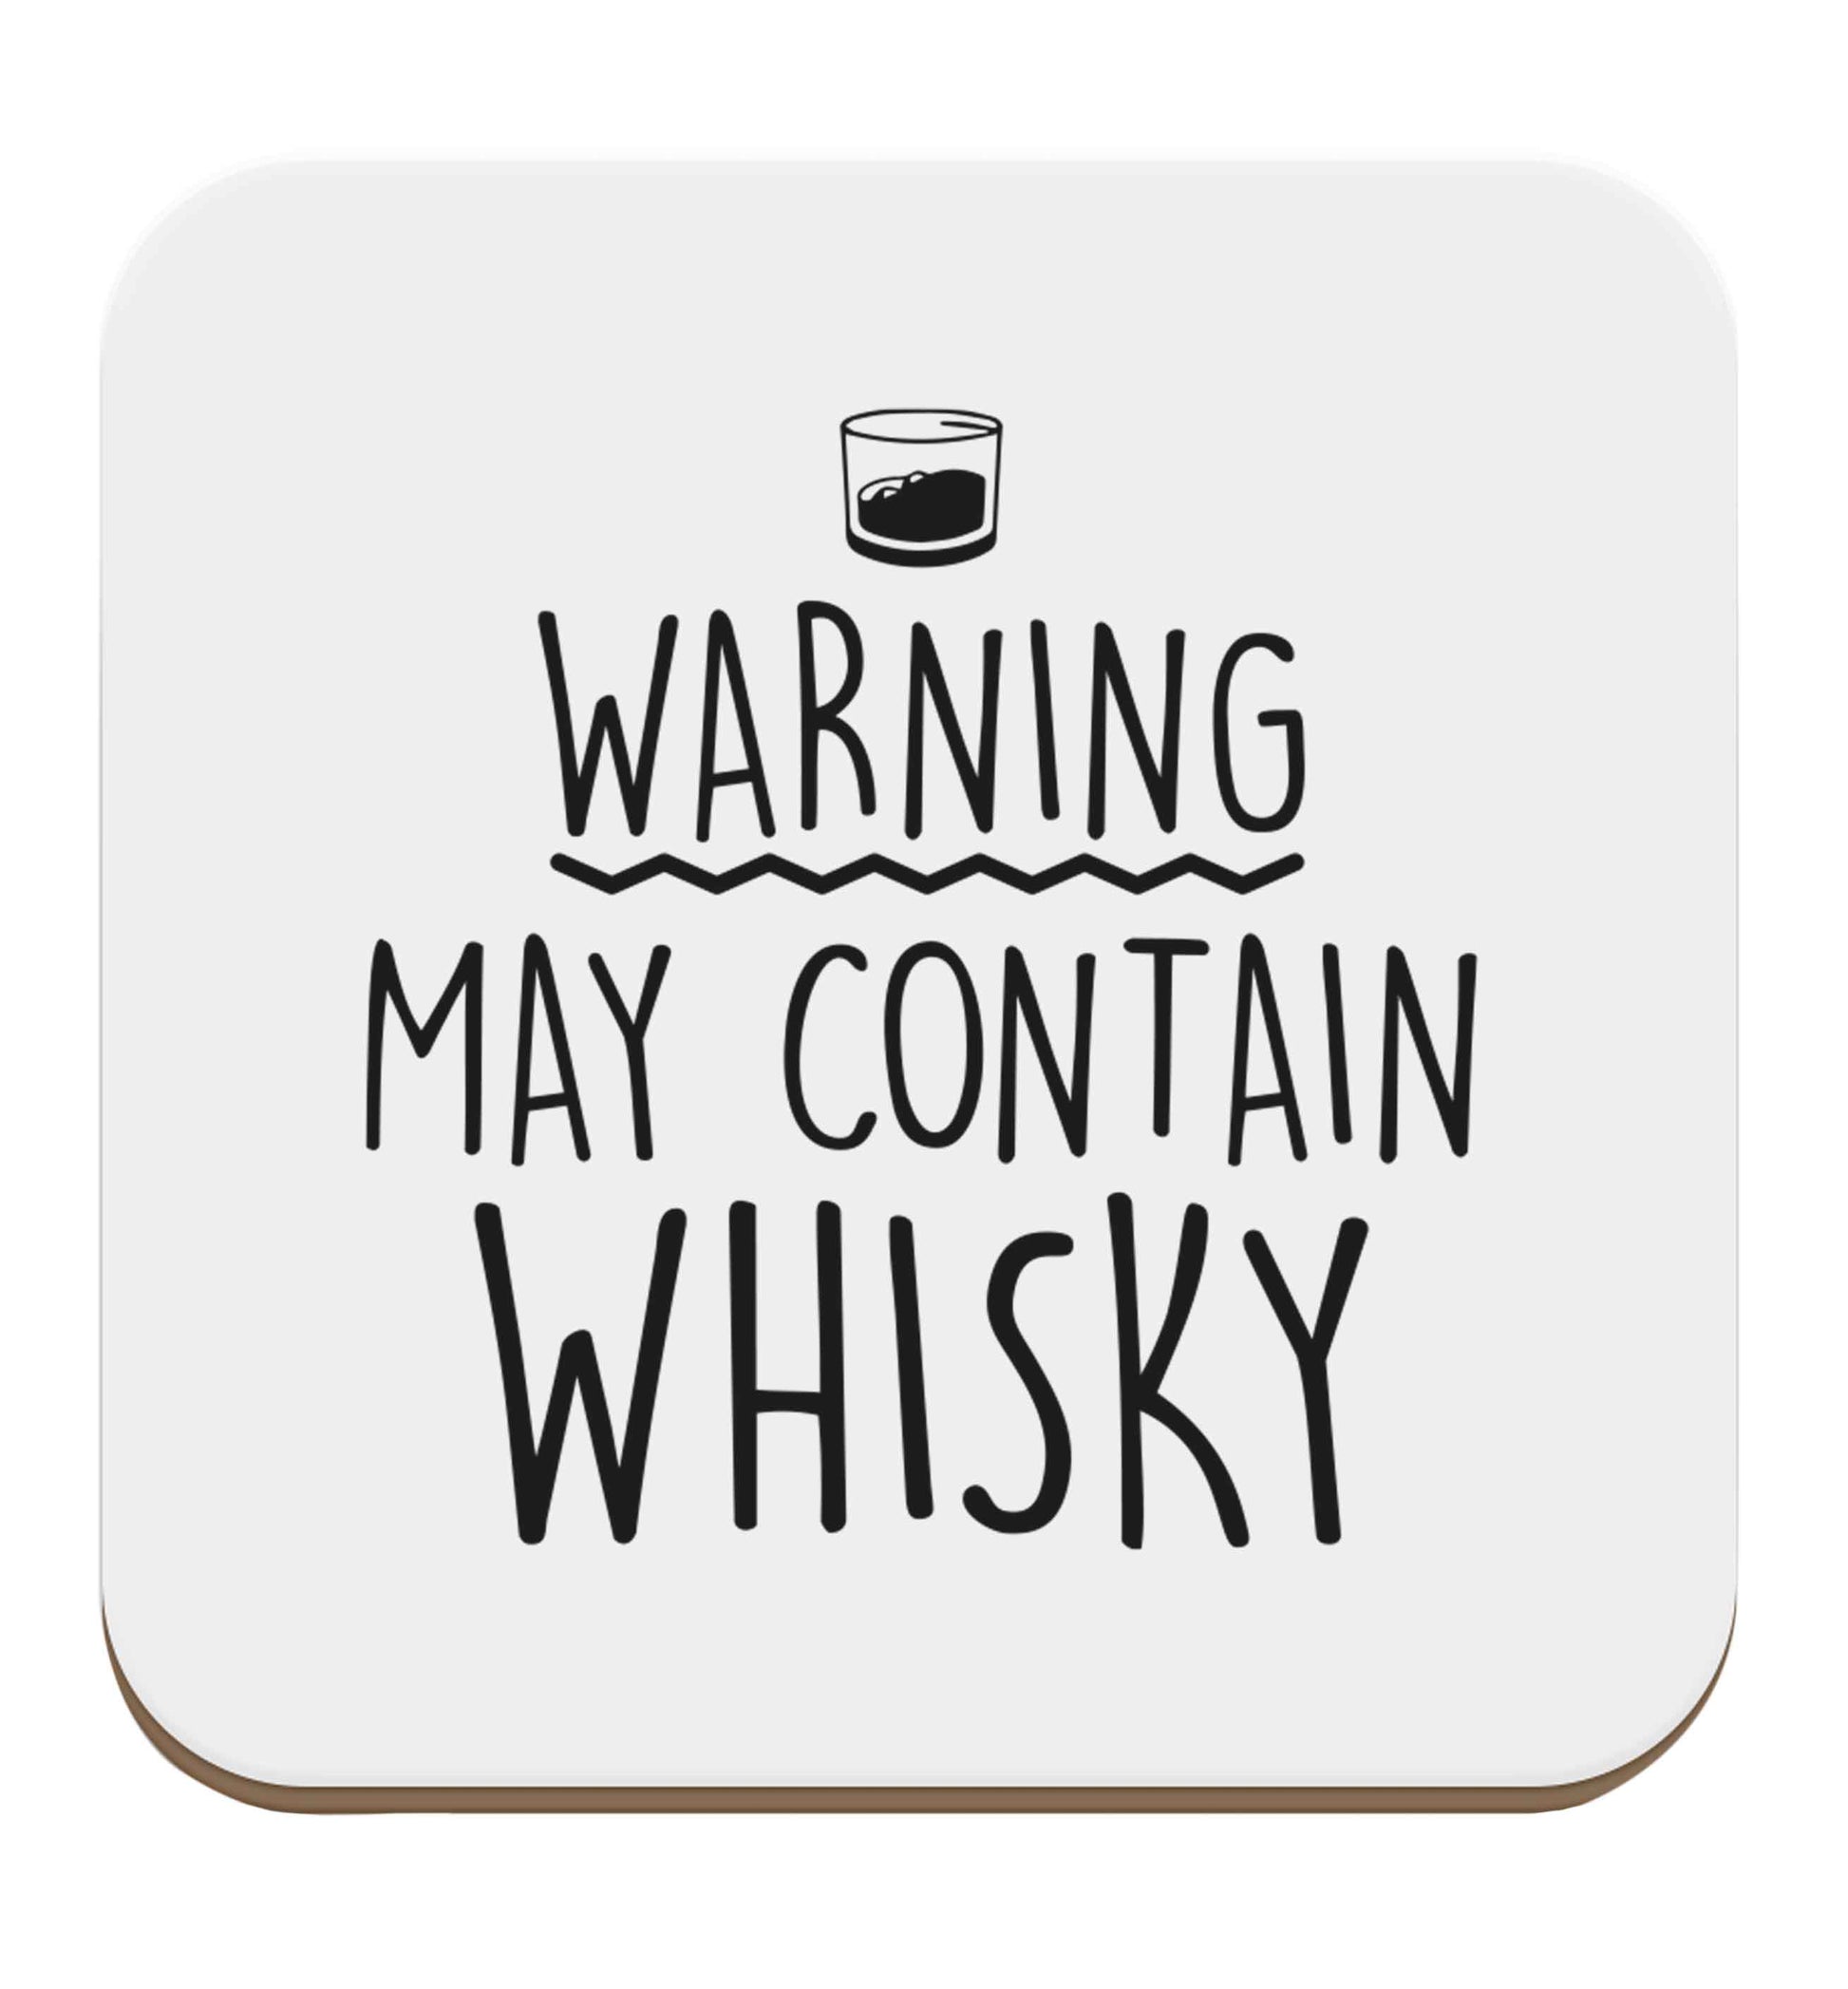 Warning may contain whisky set of four coasters